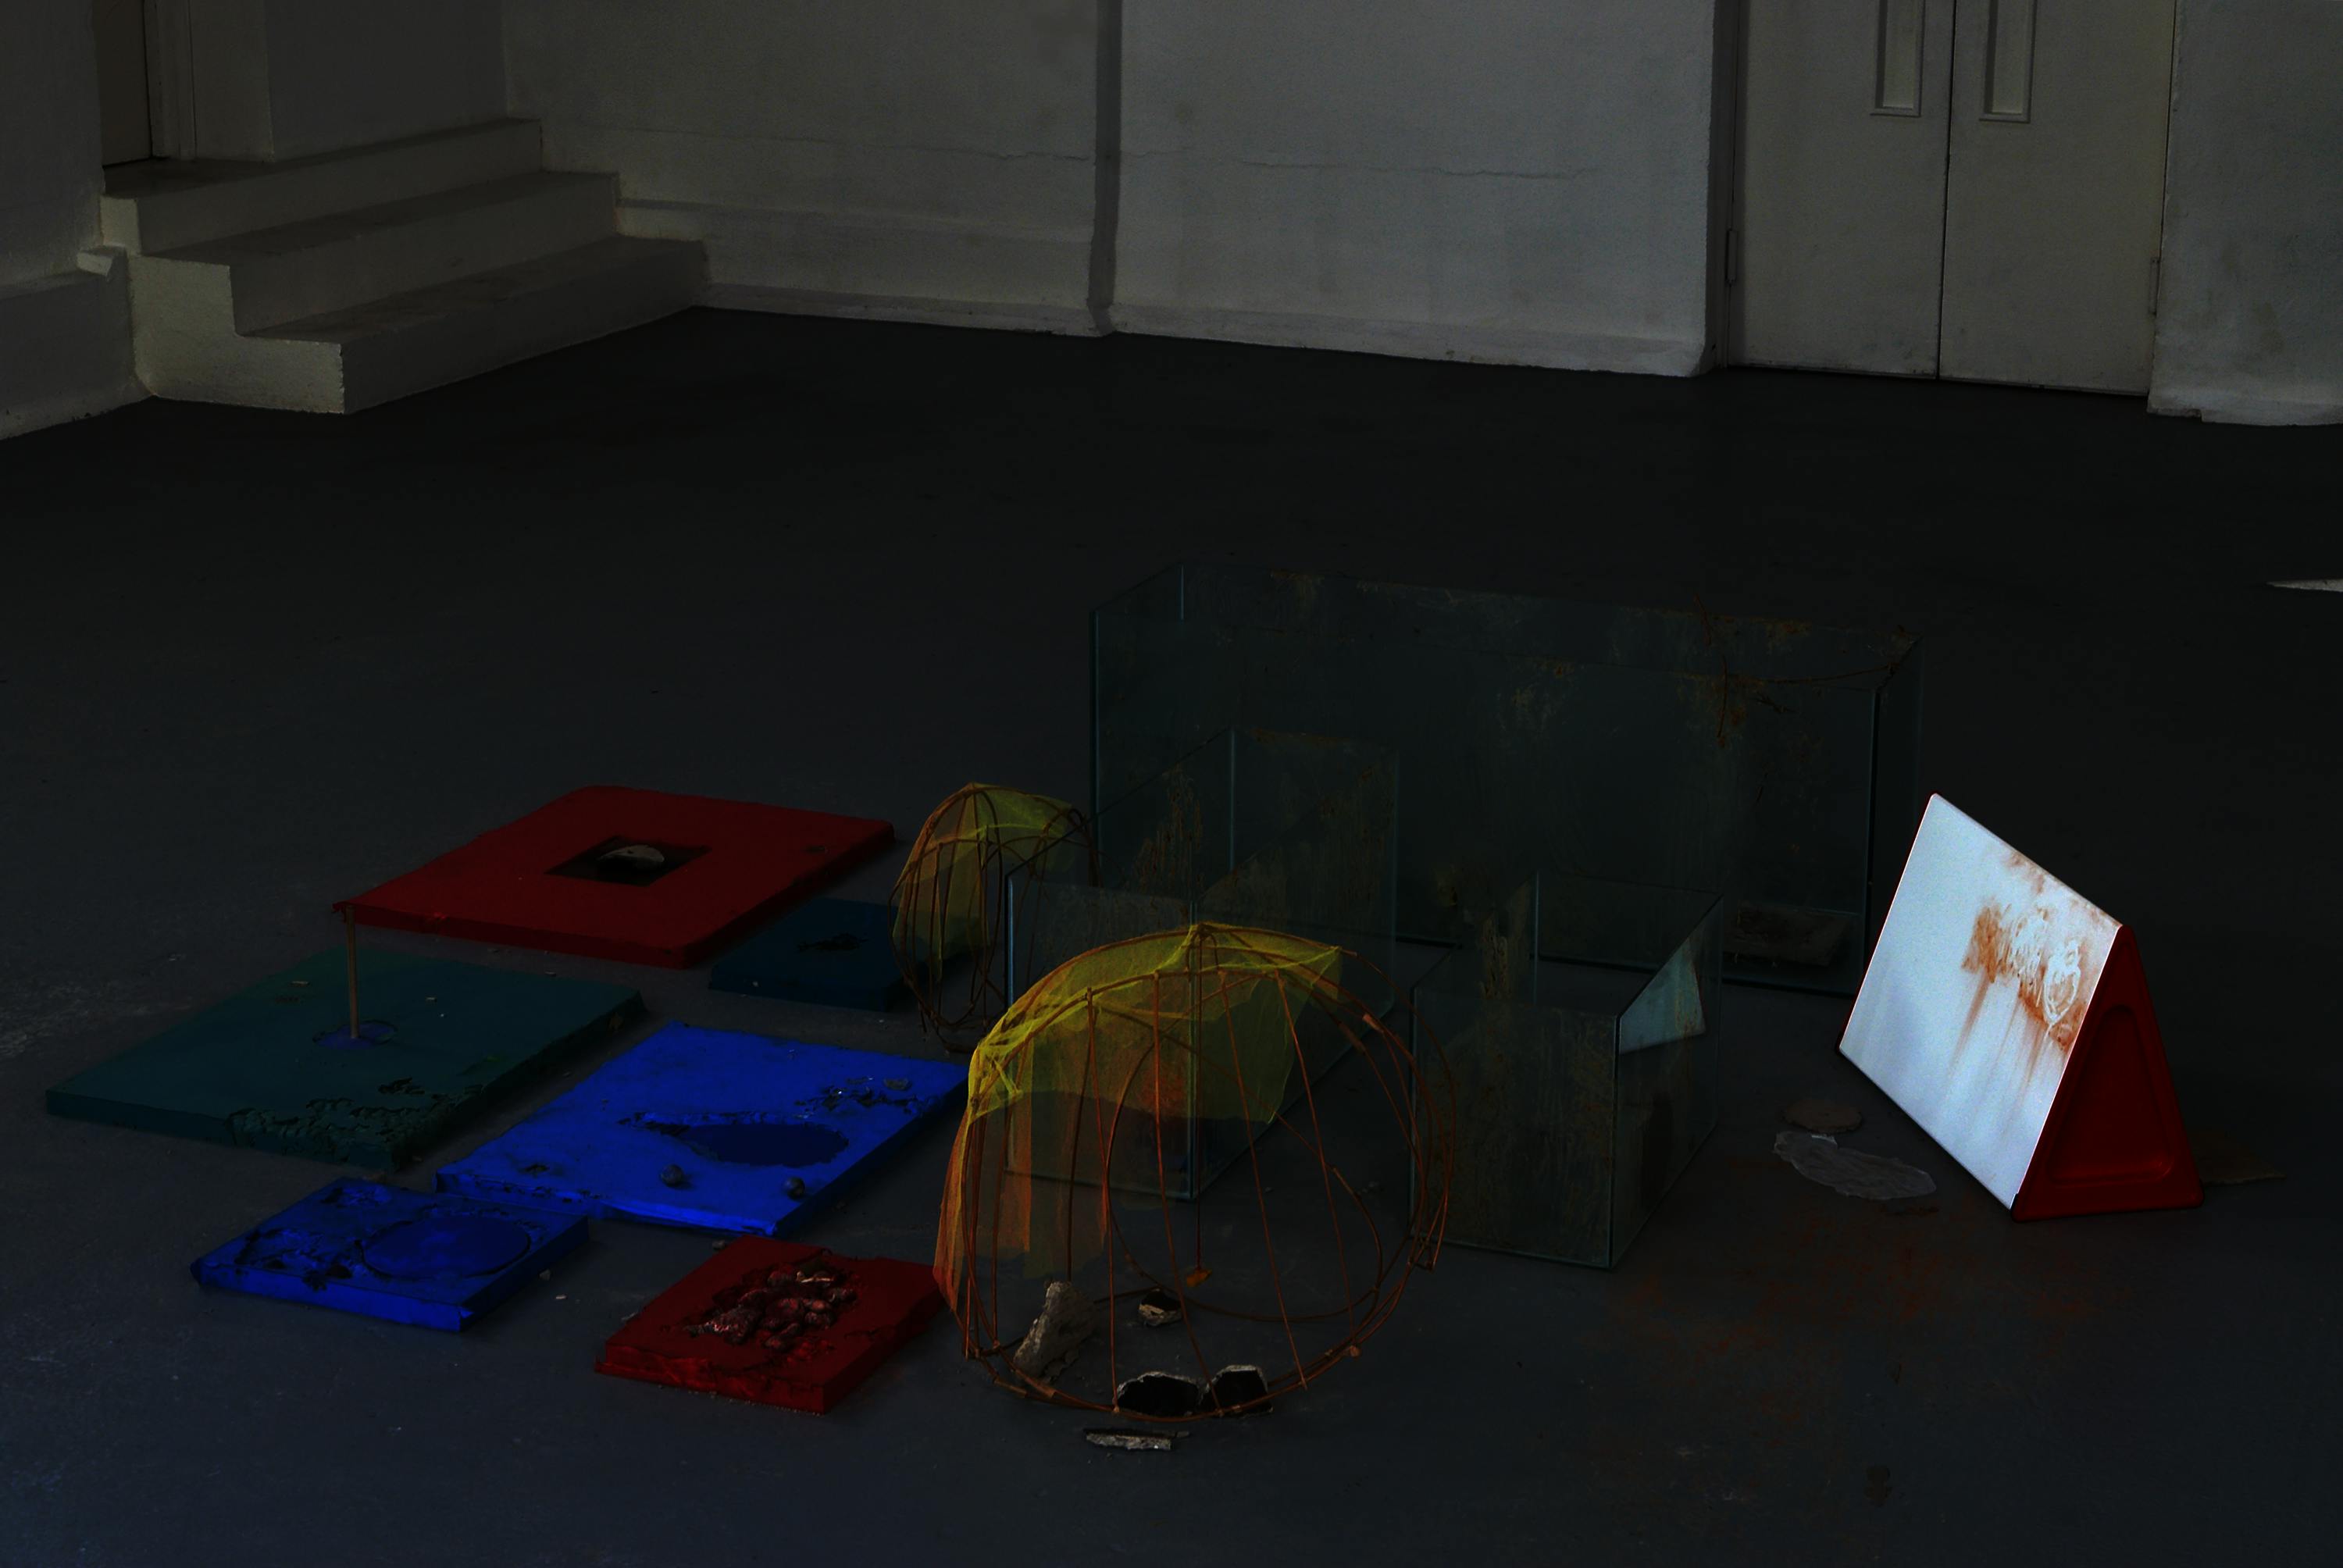 three glass tanks smeared with porridge sit amongst a collection of low to the ground red, green and blue cast silicon blocks. amongst these objects sit two open-weave twine structures topped with scraps of yellow net